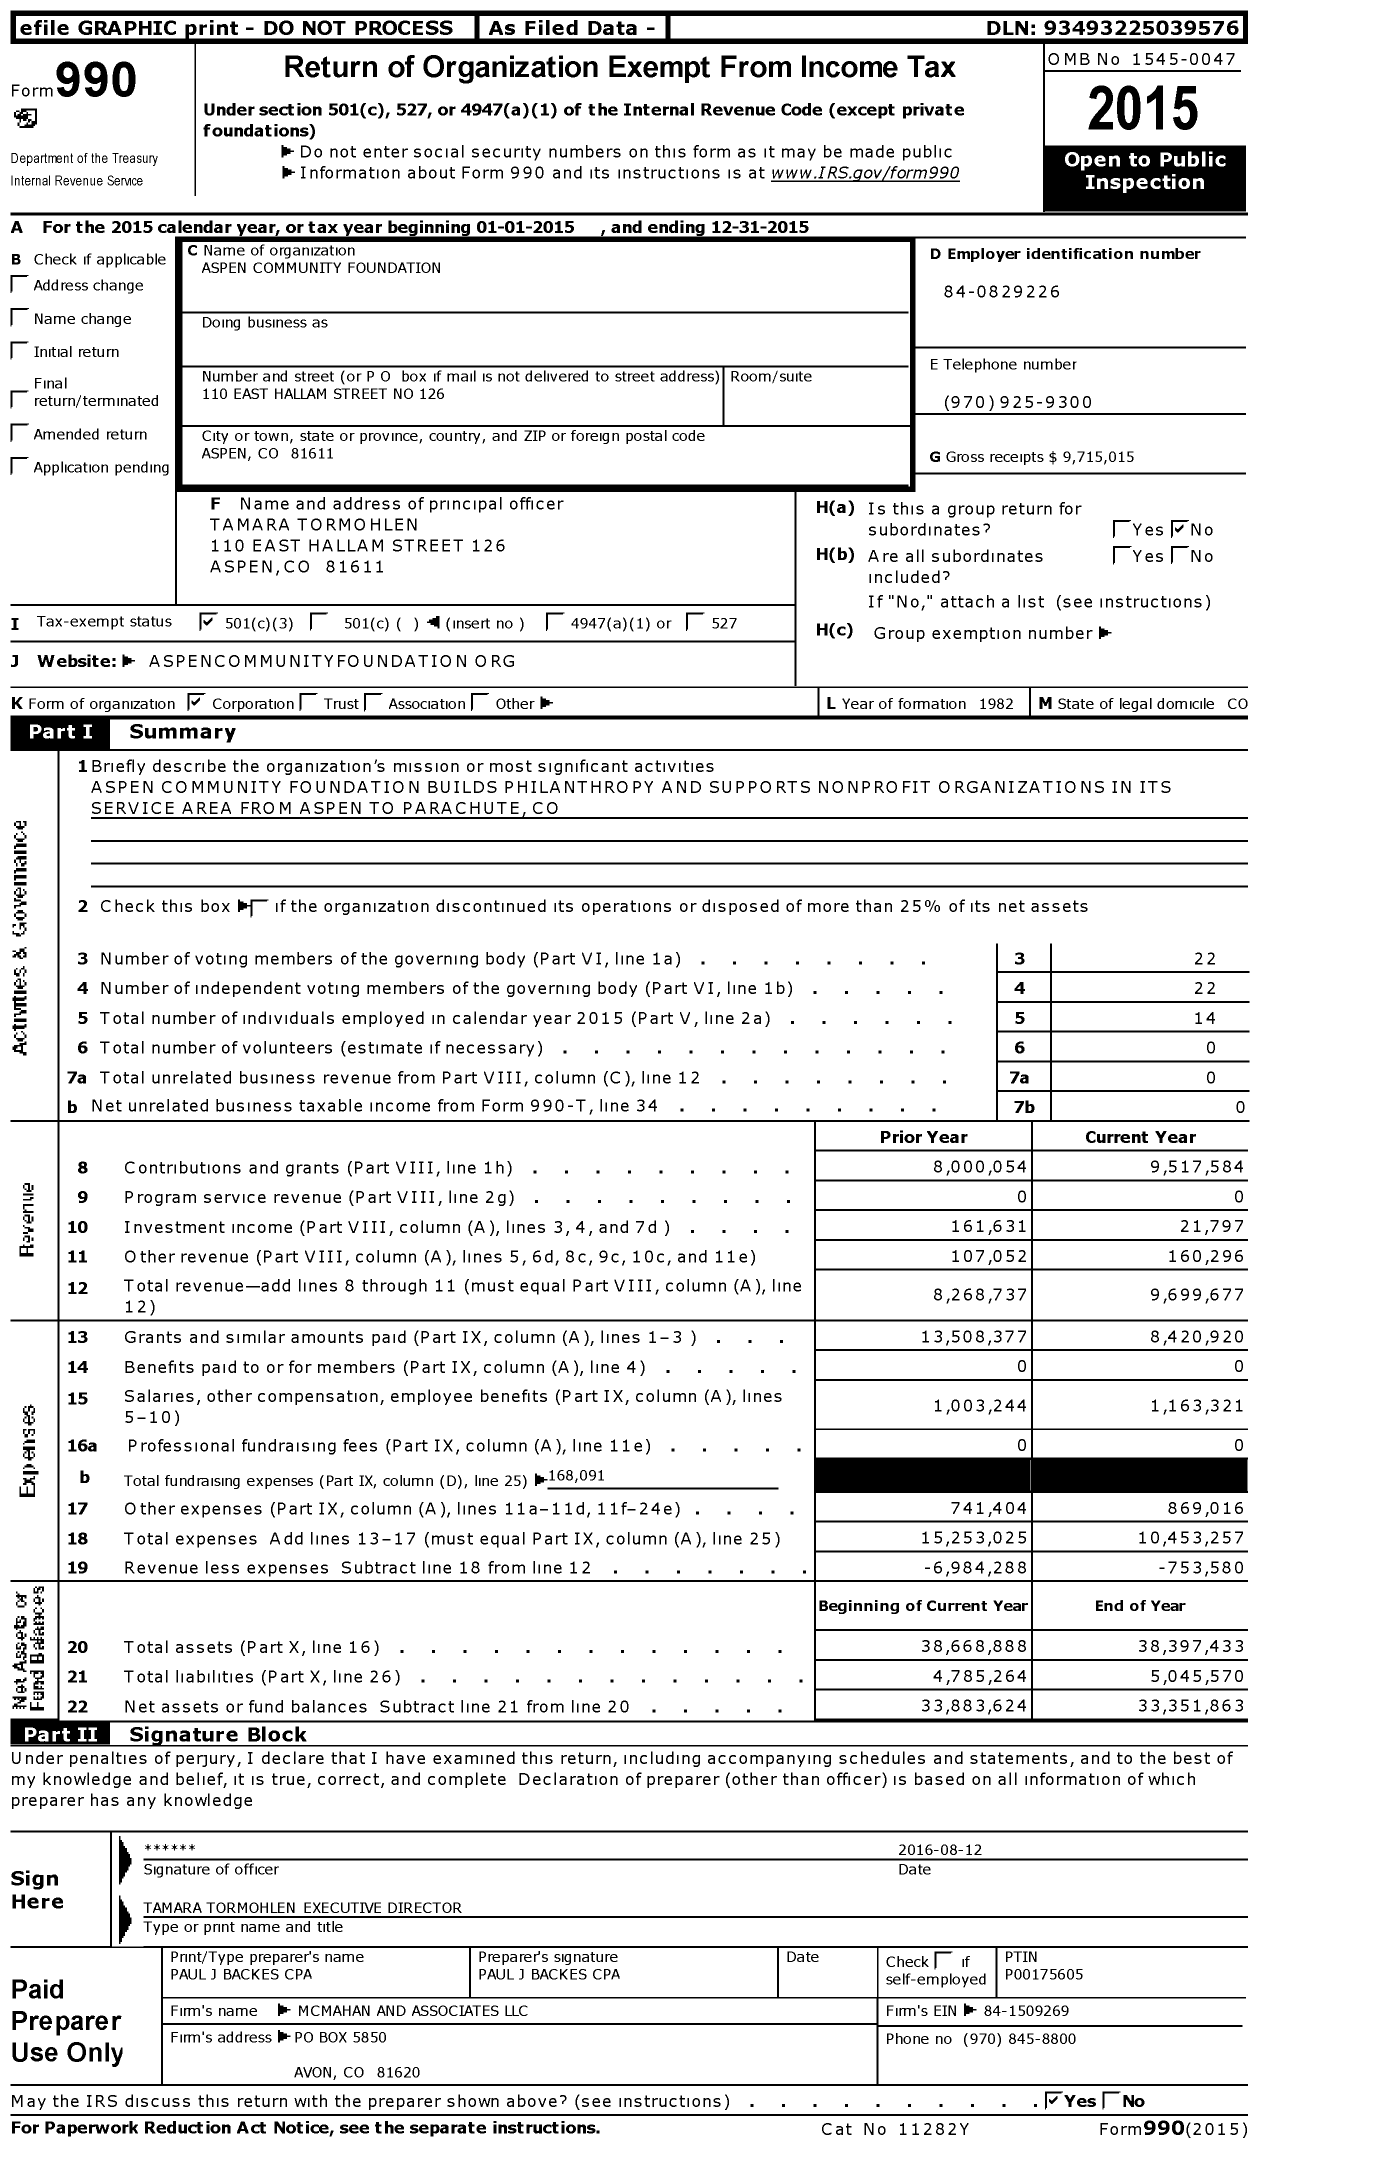 Image of first page of 2015 Form 990 for Aspen Community Foundation (ACF)